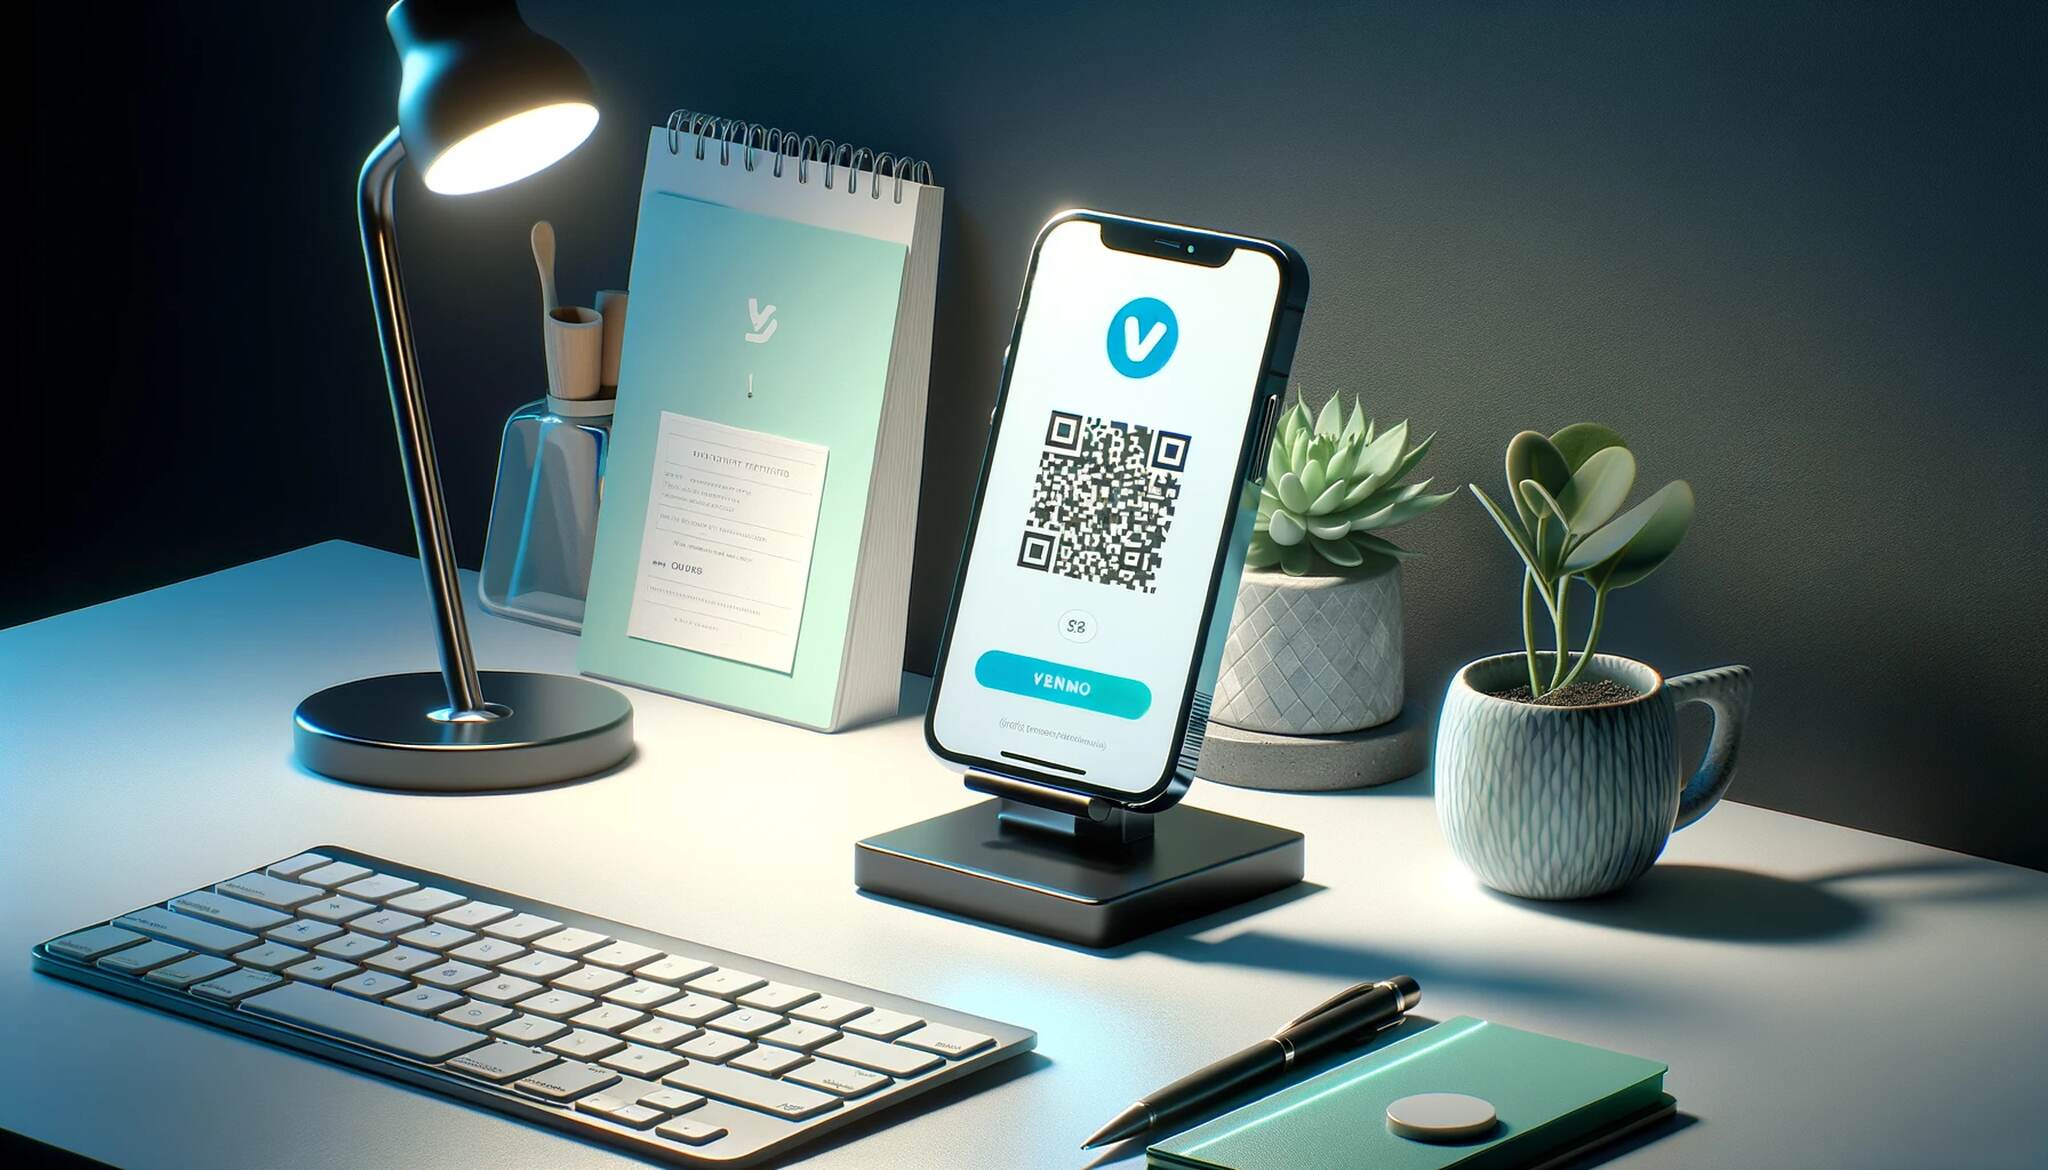 modern workspace featuring a smartphone on a sleek stand with its screen showing a simple Venmo QR code